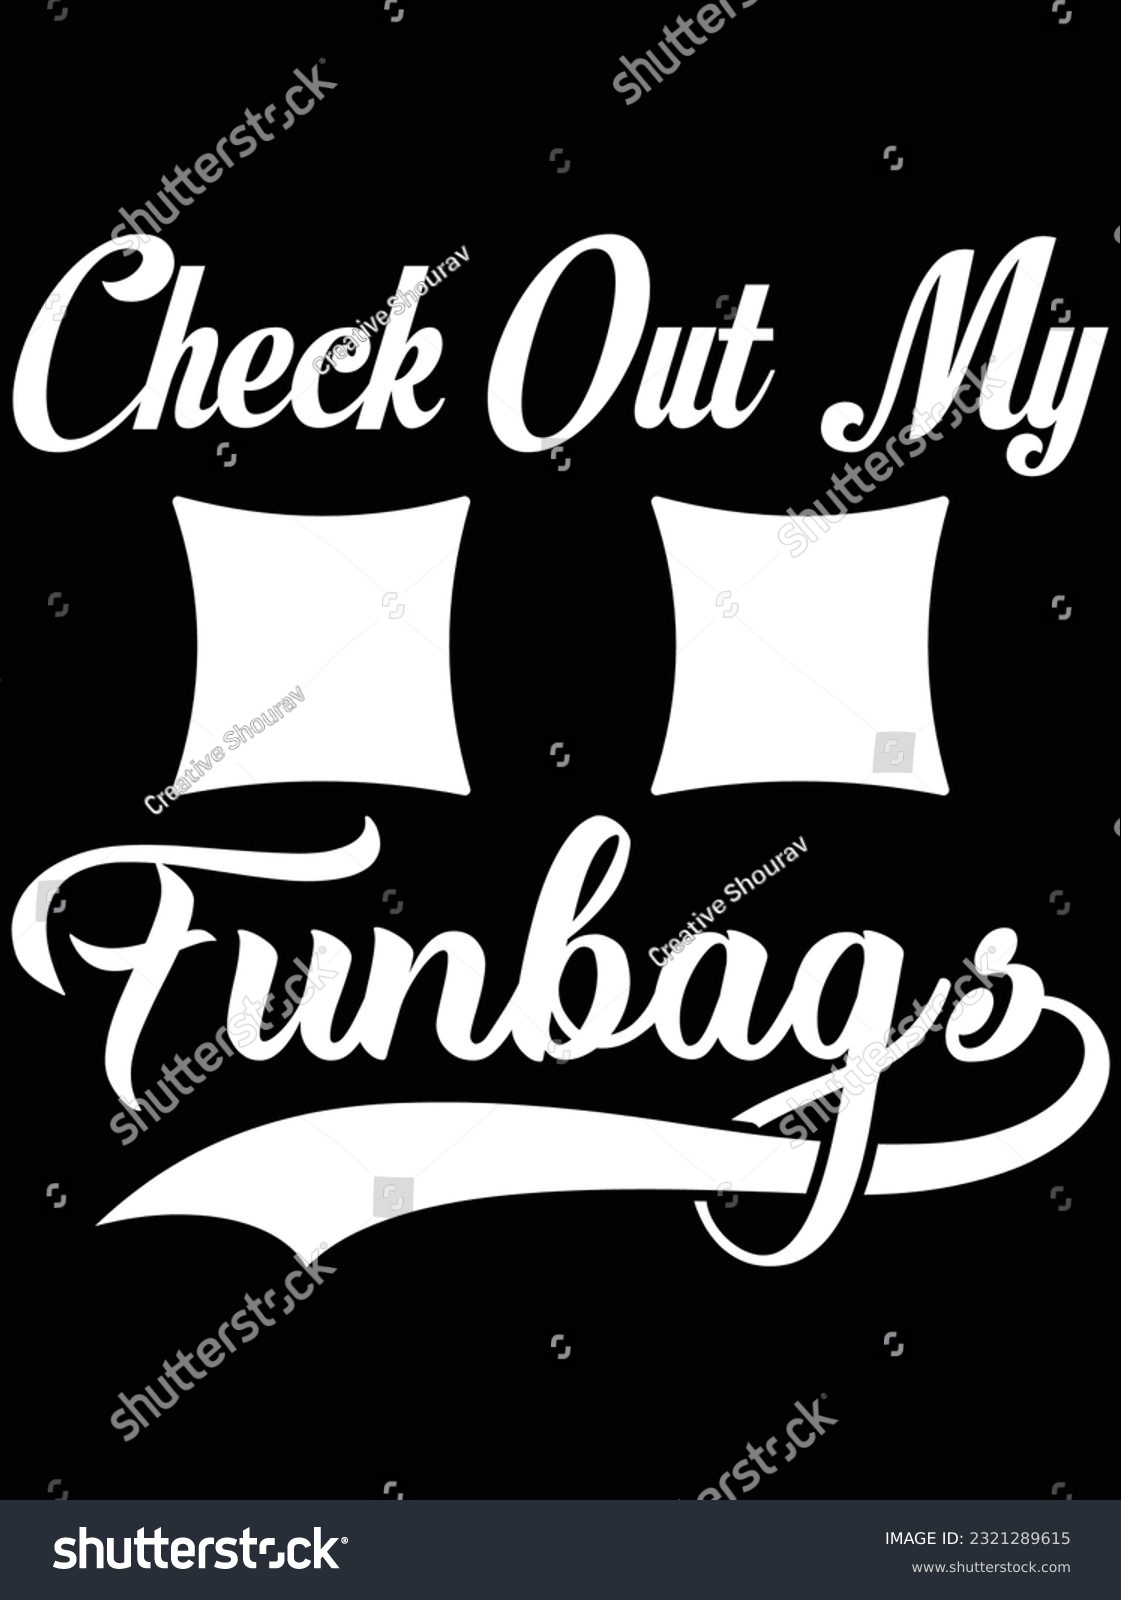 SVG of Check out my funbags vector art design, eps file. design file for t-shirt. SVG, EPS cuttable design file svg